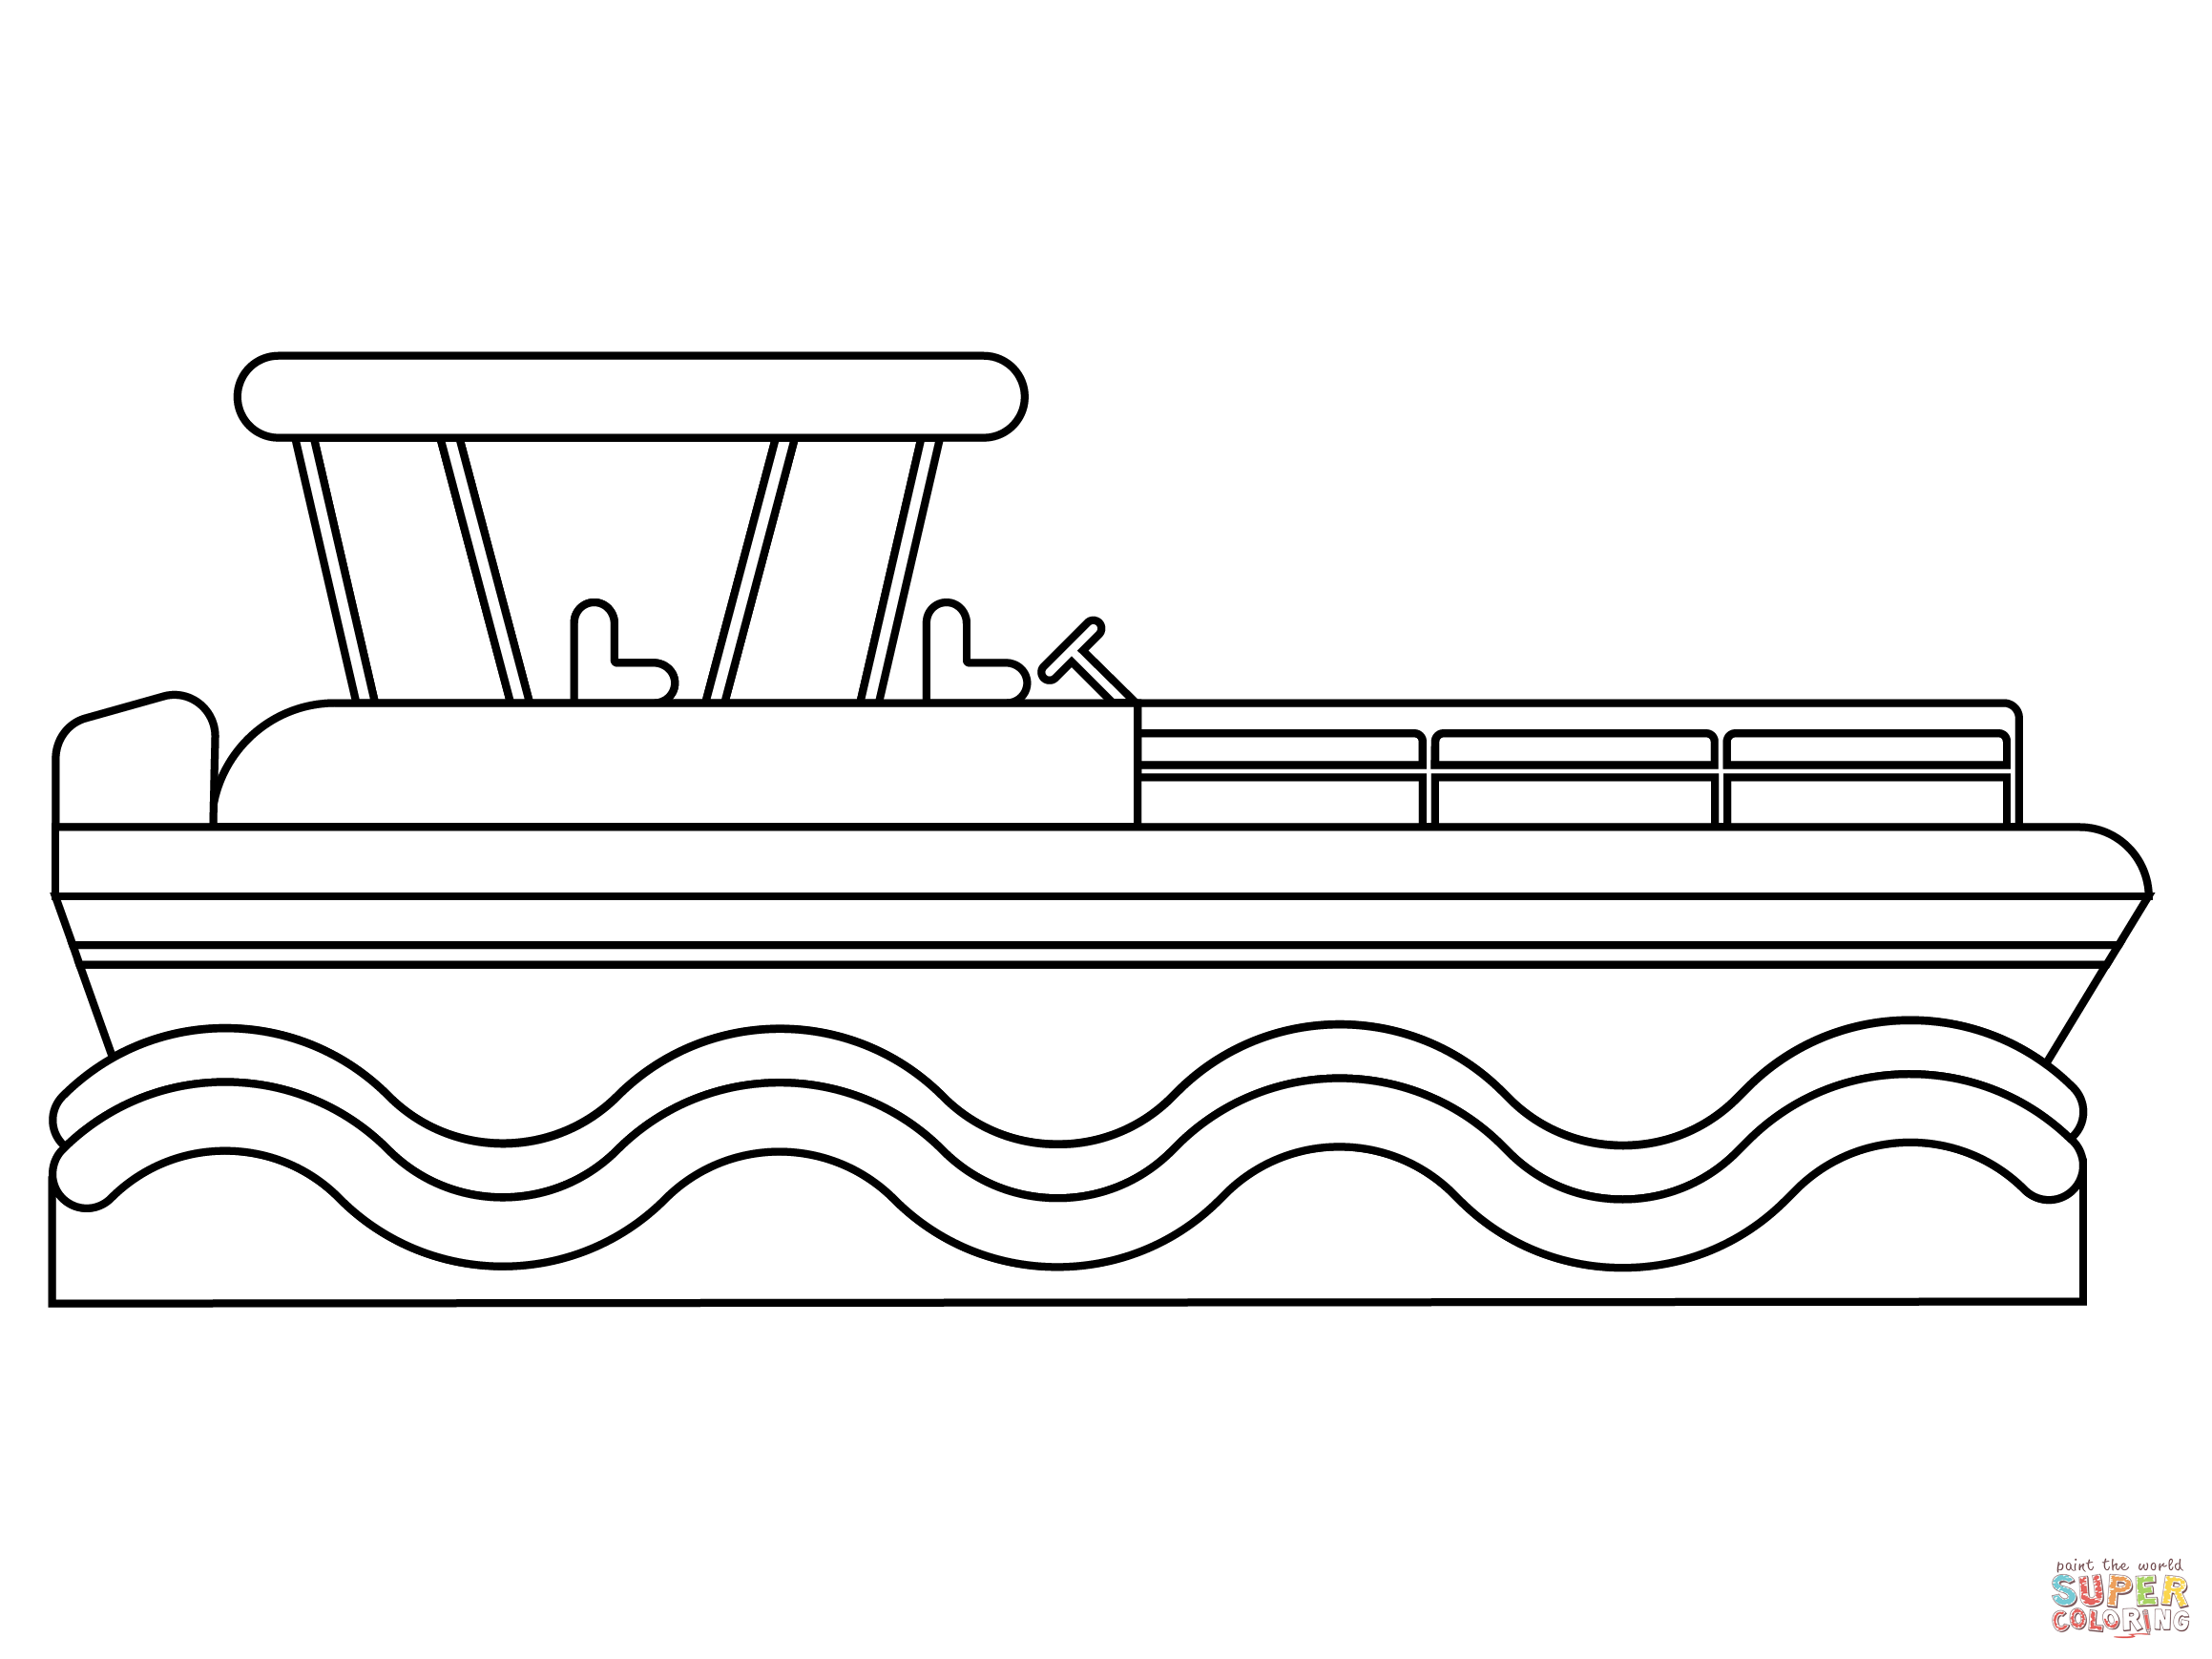 Pontoon boat coloring page free printable coloring pages